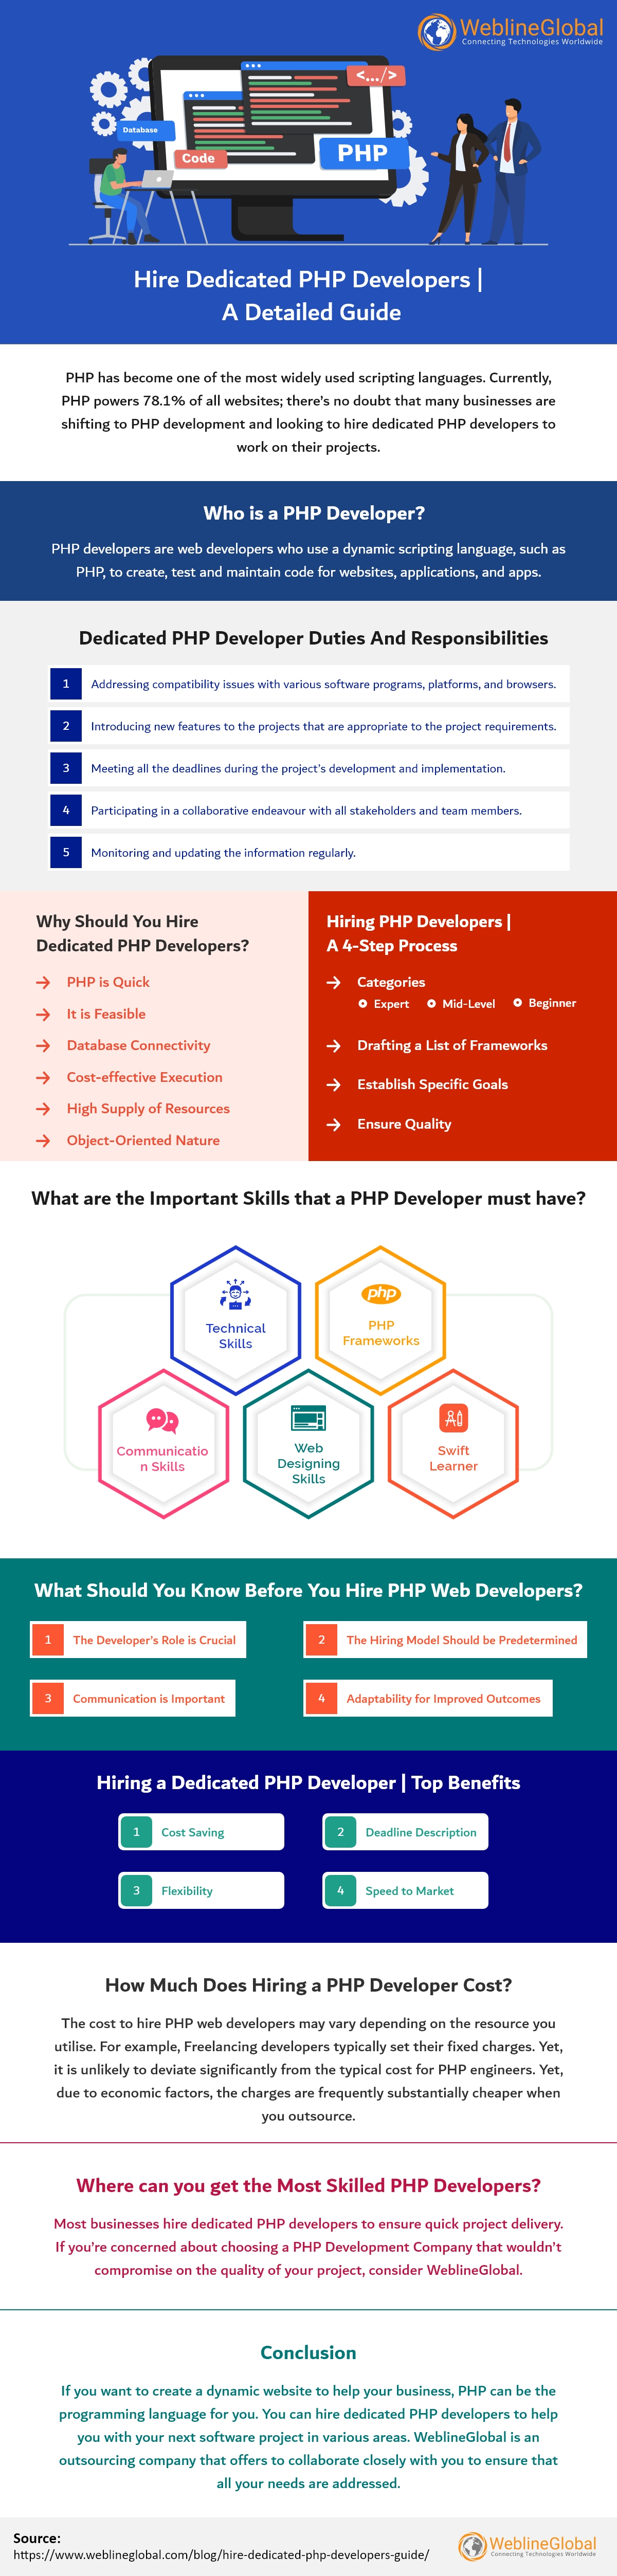 Hire Dedicated PHP Developers Guide INFOGRAPHIC